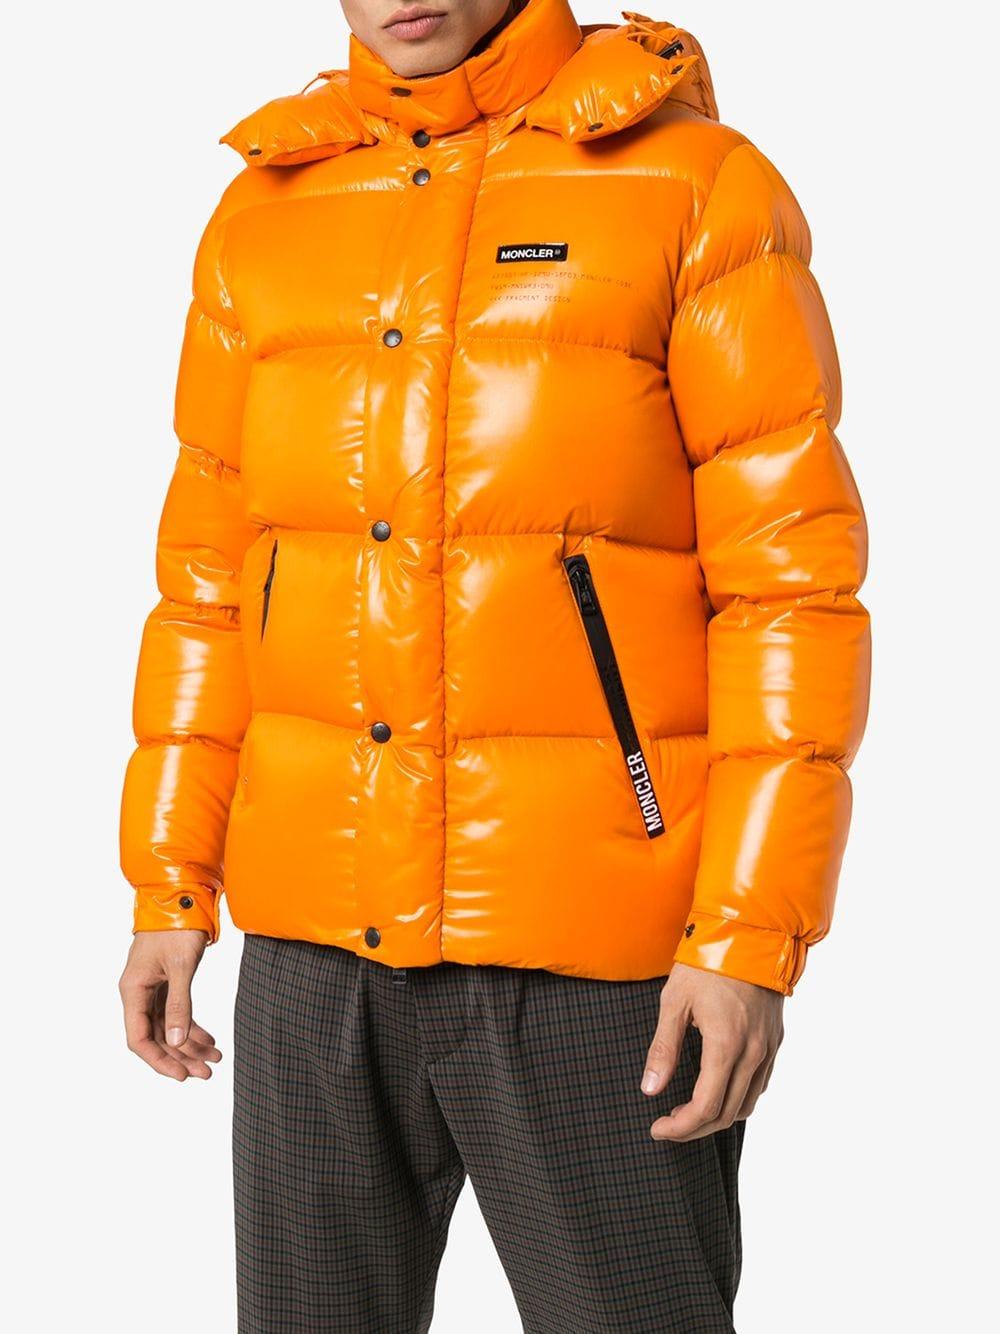 Moncler Genius Synthetic 7 Moncler Fragment Hanriot Quilted Nylon Hooded  Down Jacket in Orange for Men - Lyst